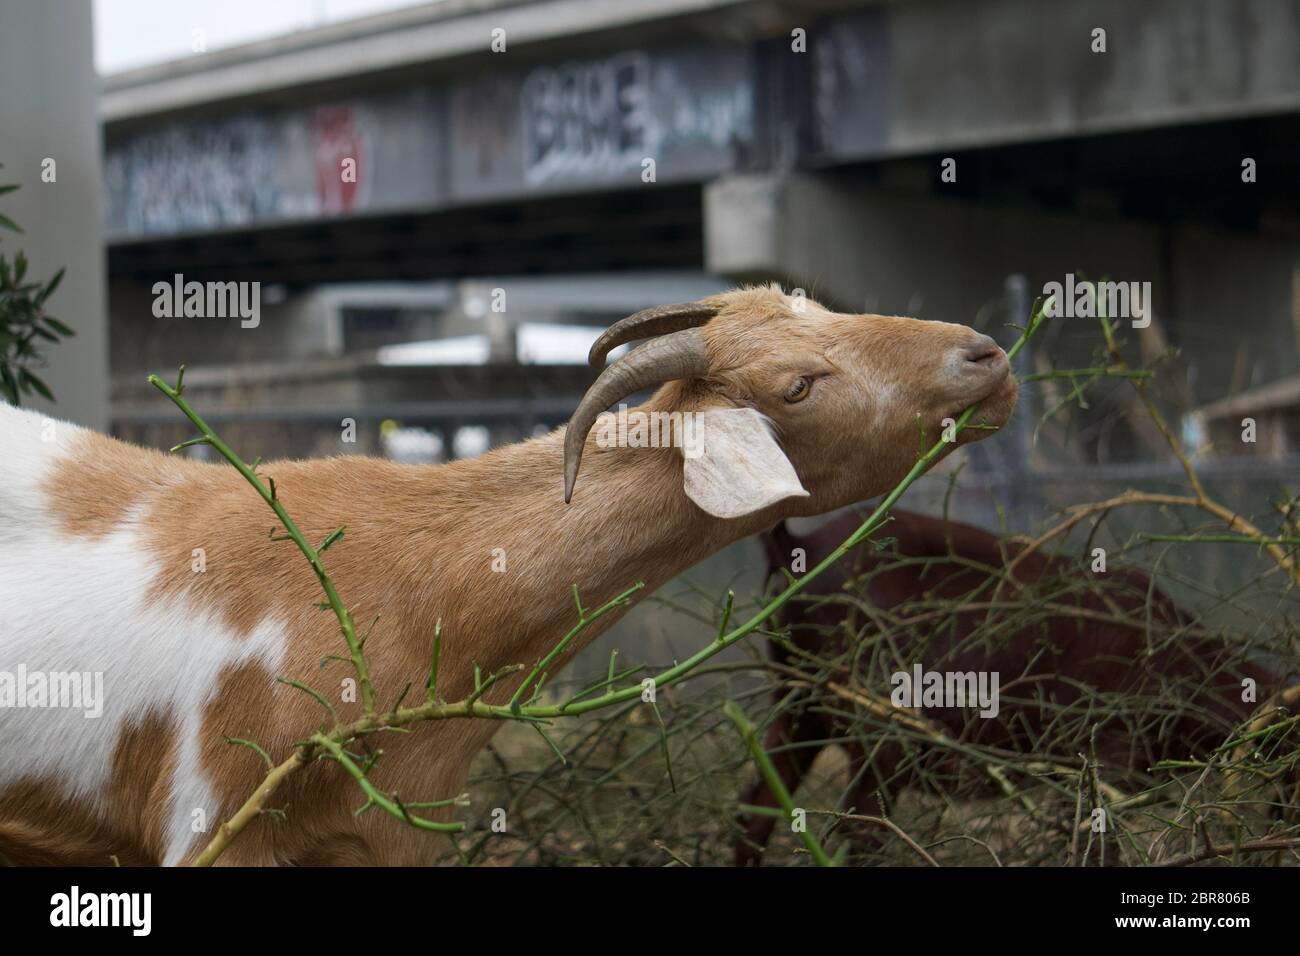 Rented brown goat with bear hired to graze and remove weeds for sustainable land management and fire risk reduction under highways. Oakland, California Stock Photo